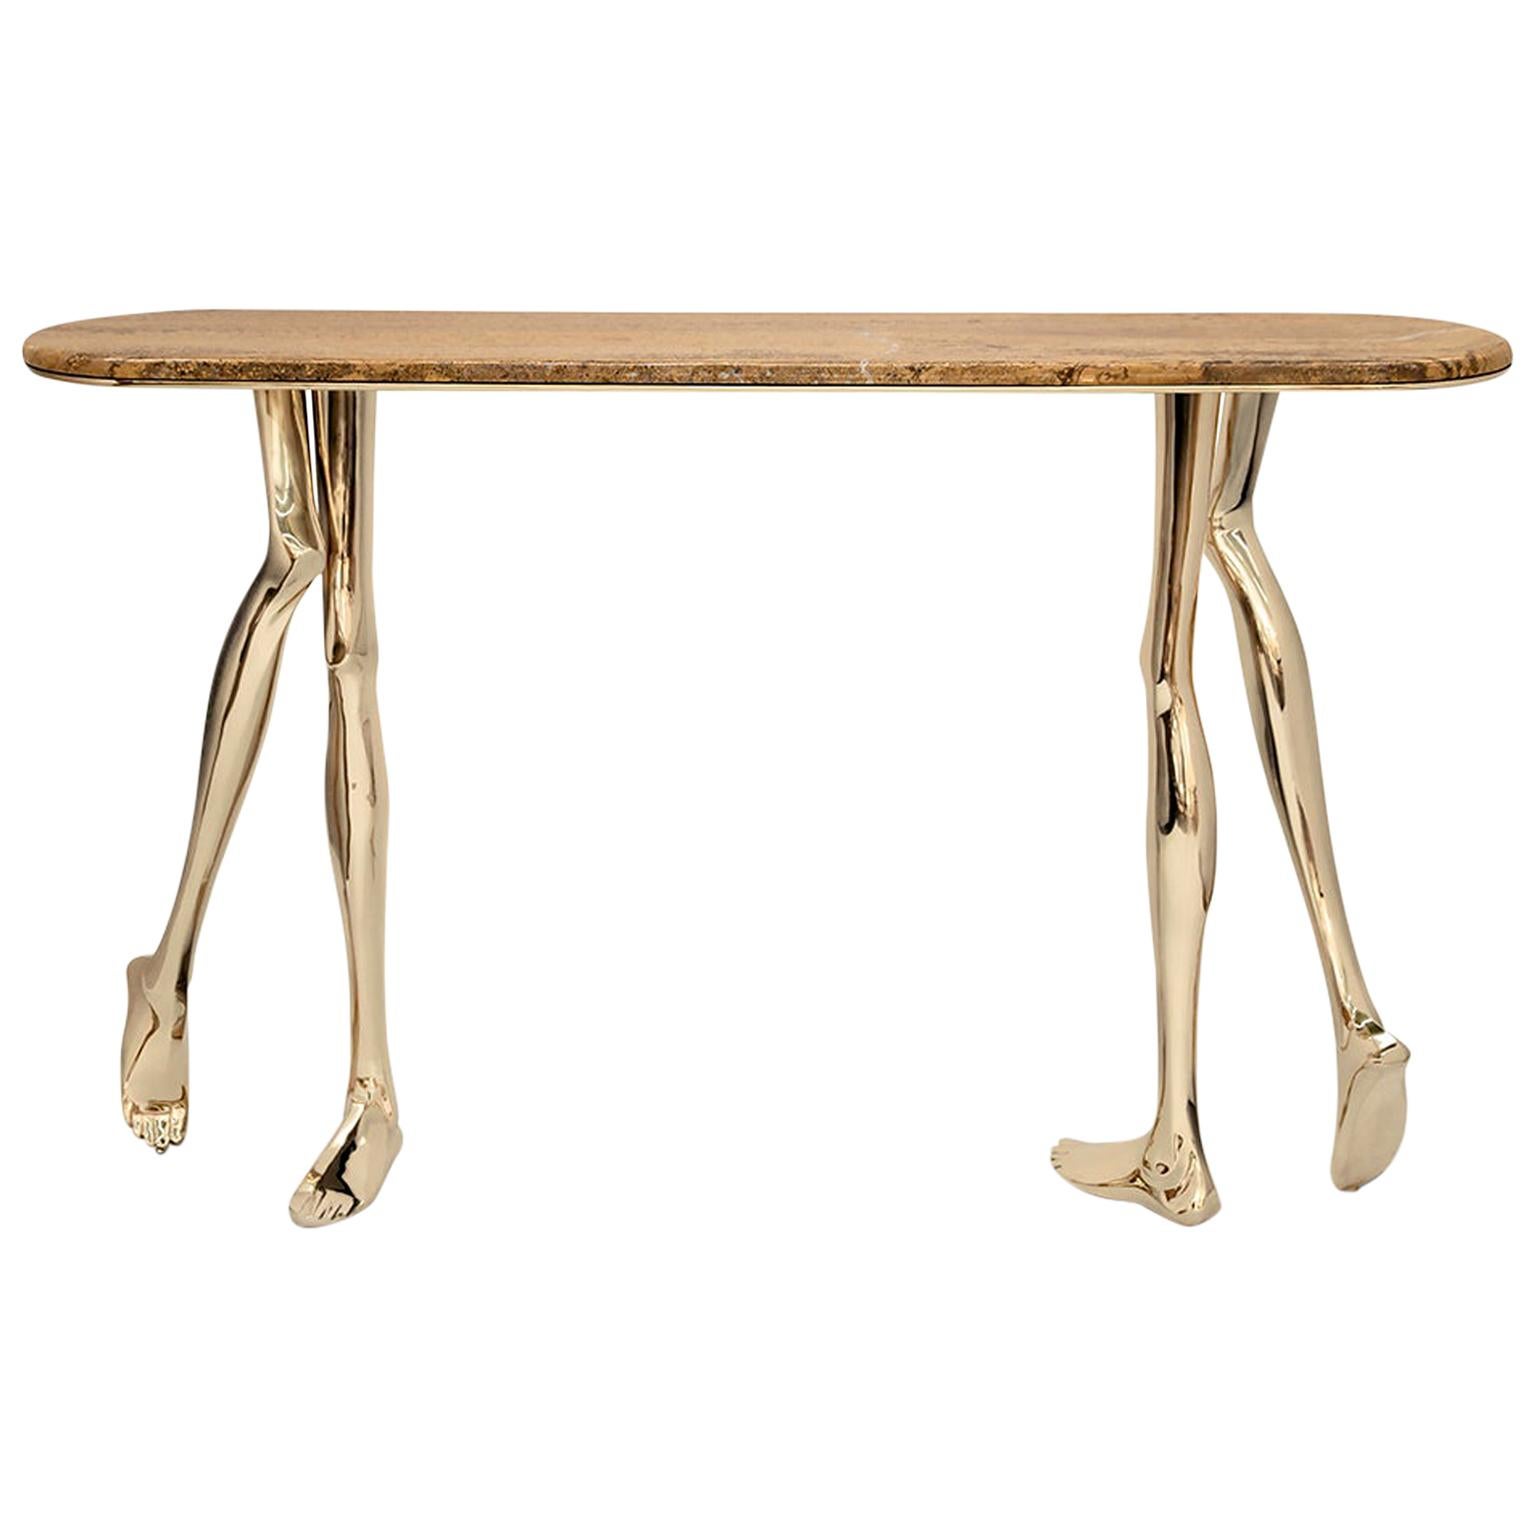 Modern Monroe Console Table in Polished Brass and Yellow Travertine Marble